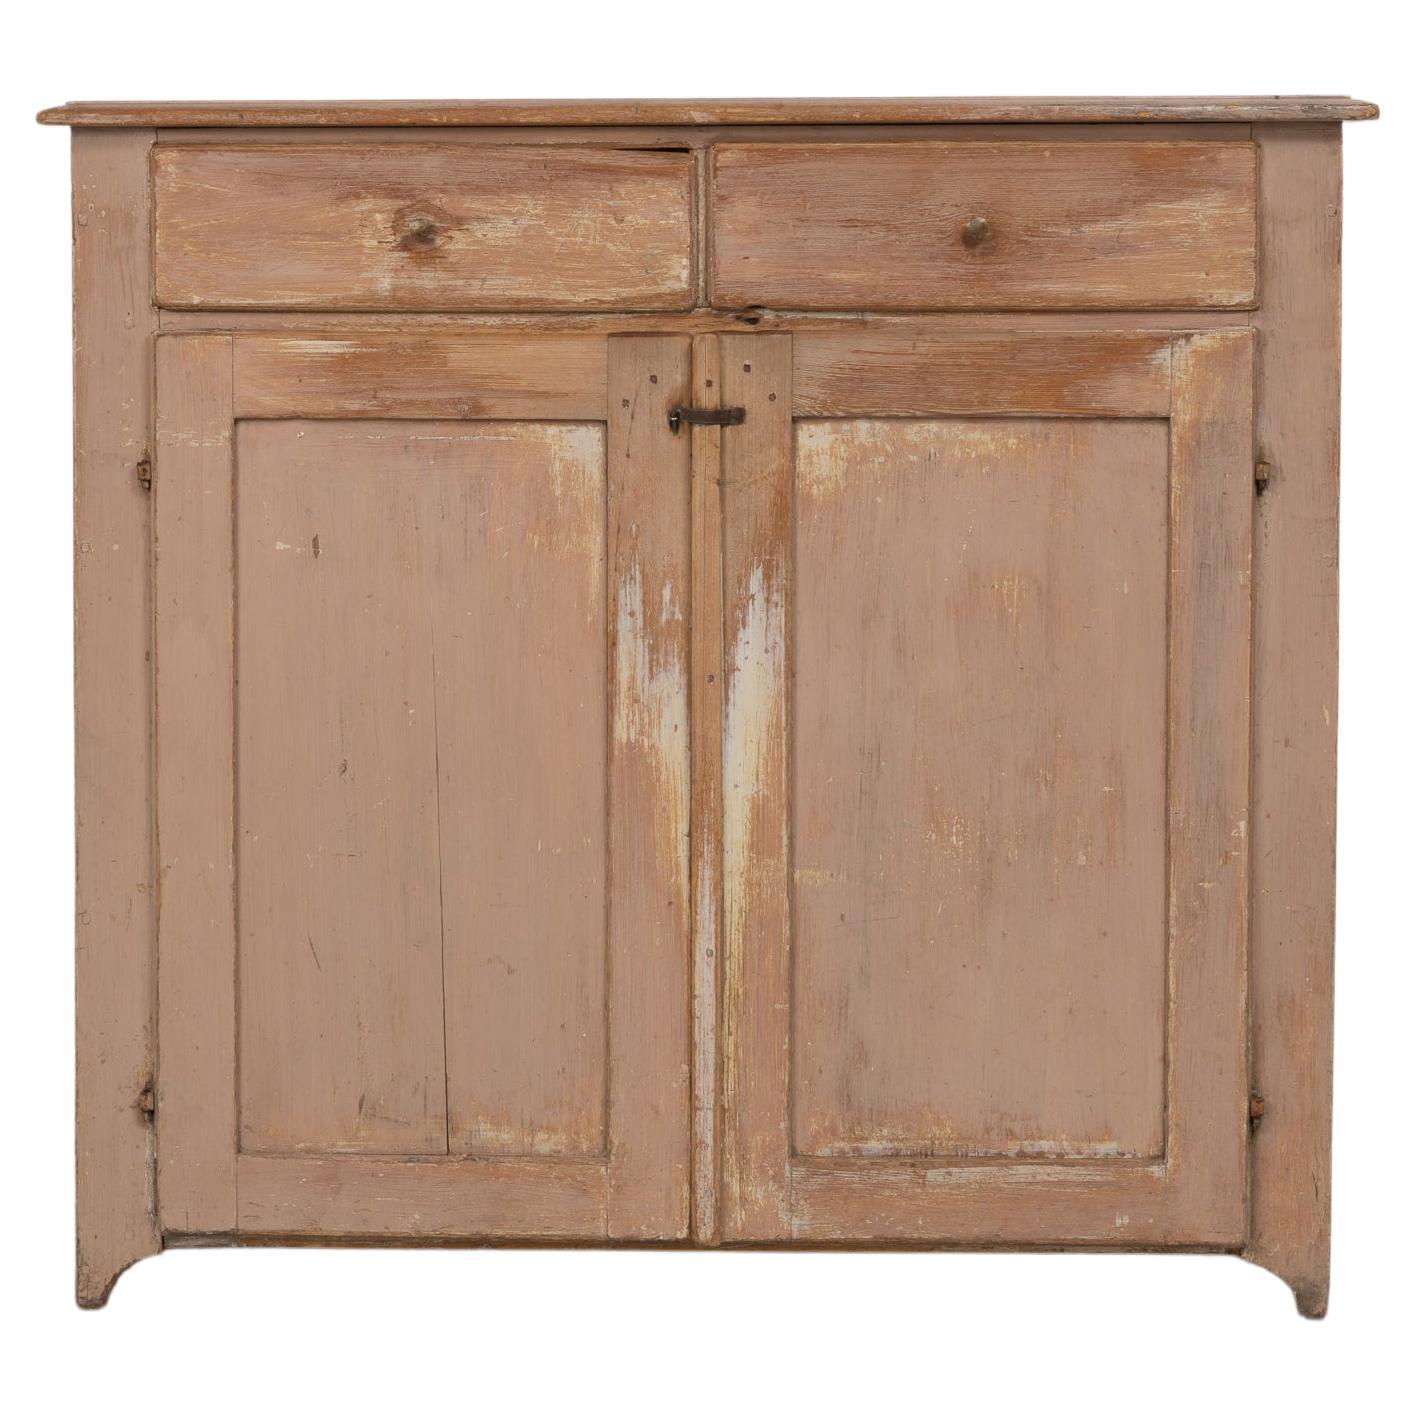 Mid 19th Century Swedish Country Home Sideboard